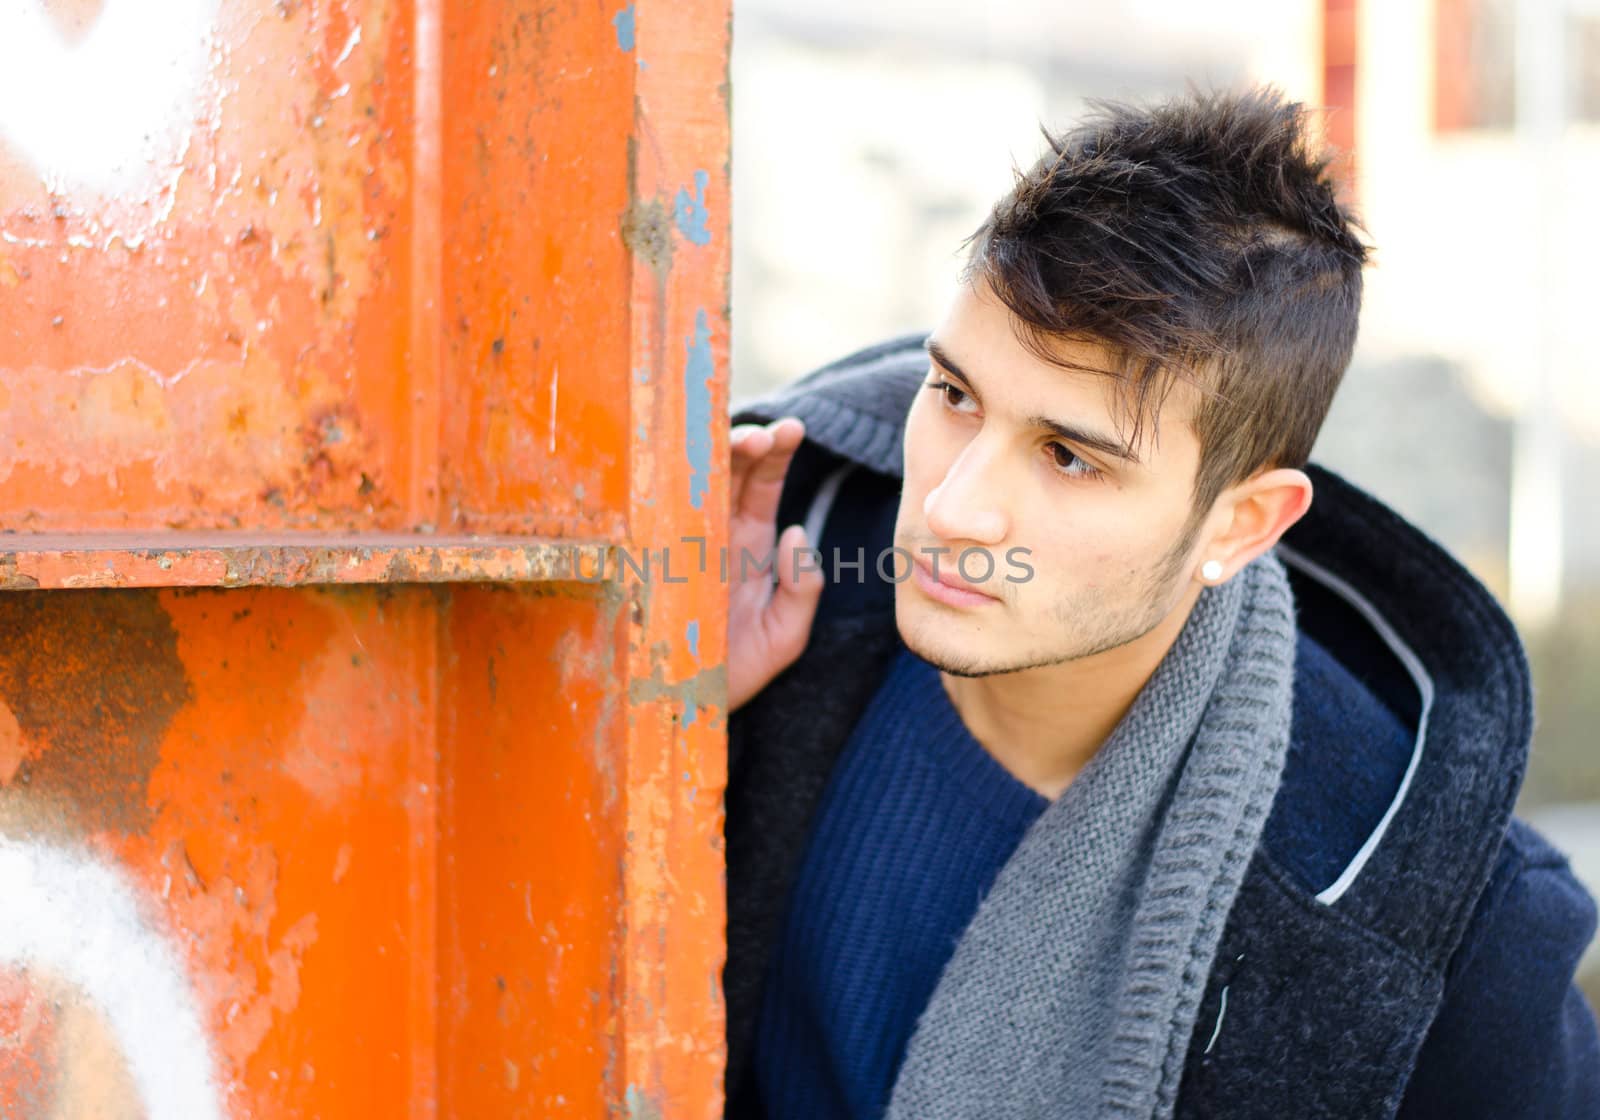 Attractive young man looking beyond metal structure by artofphoto